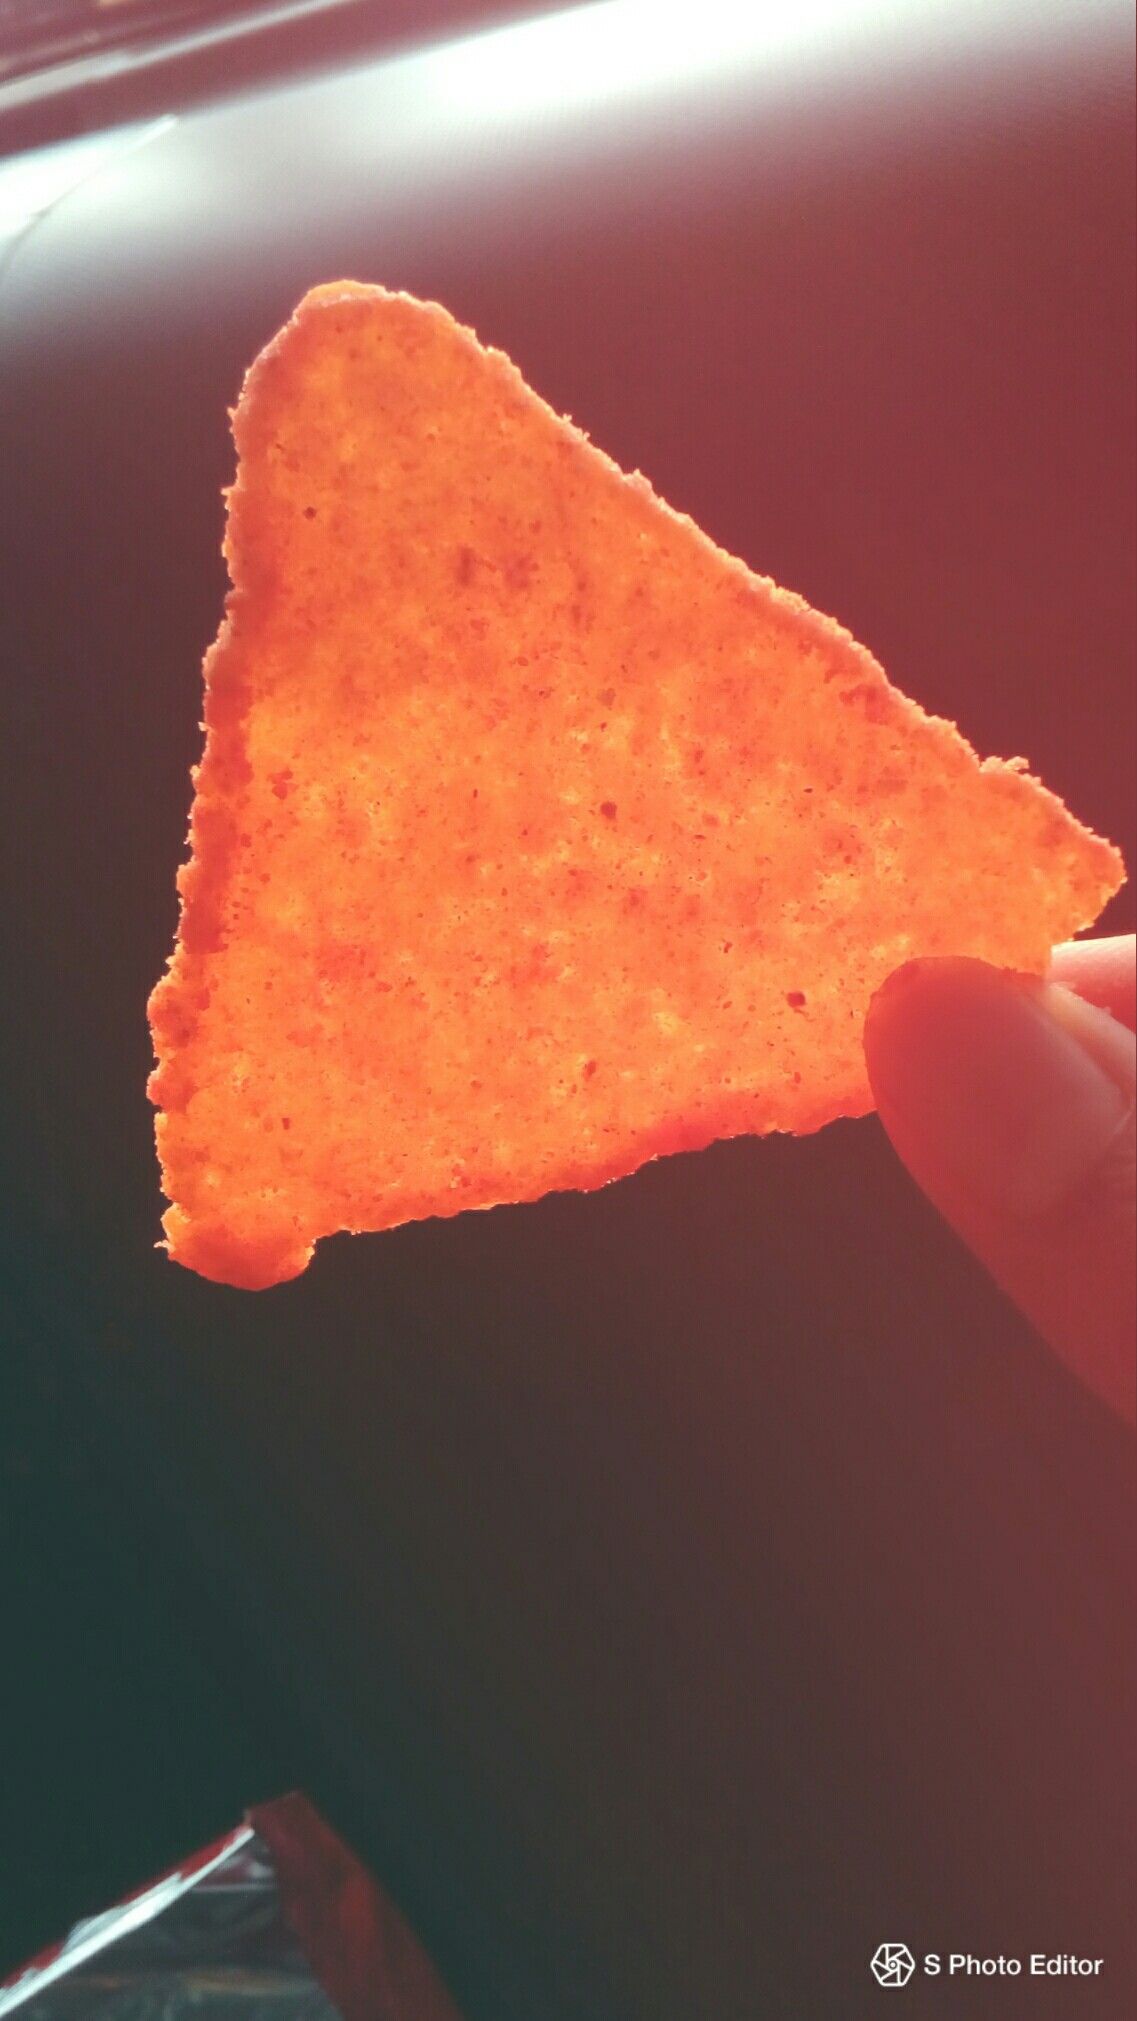 A person holding up some orange chips - Doritos